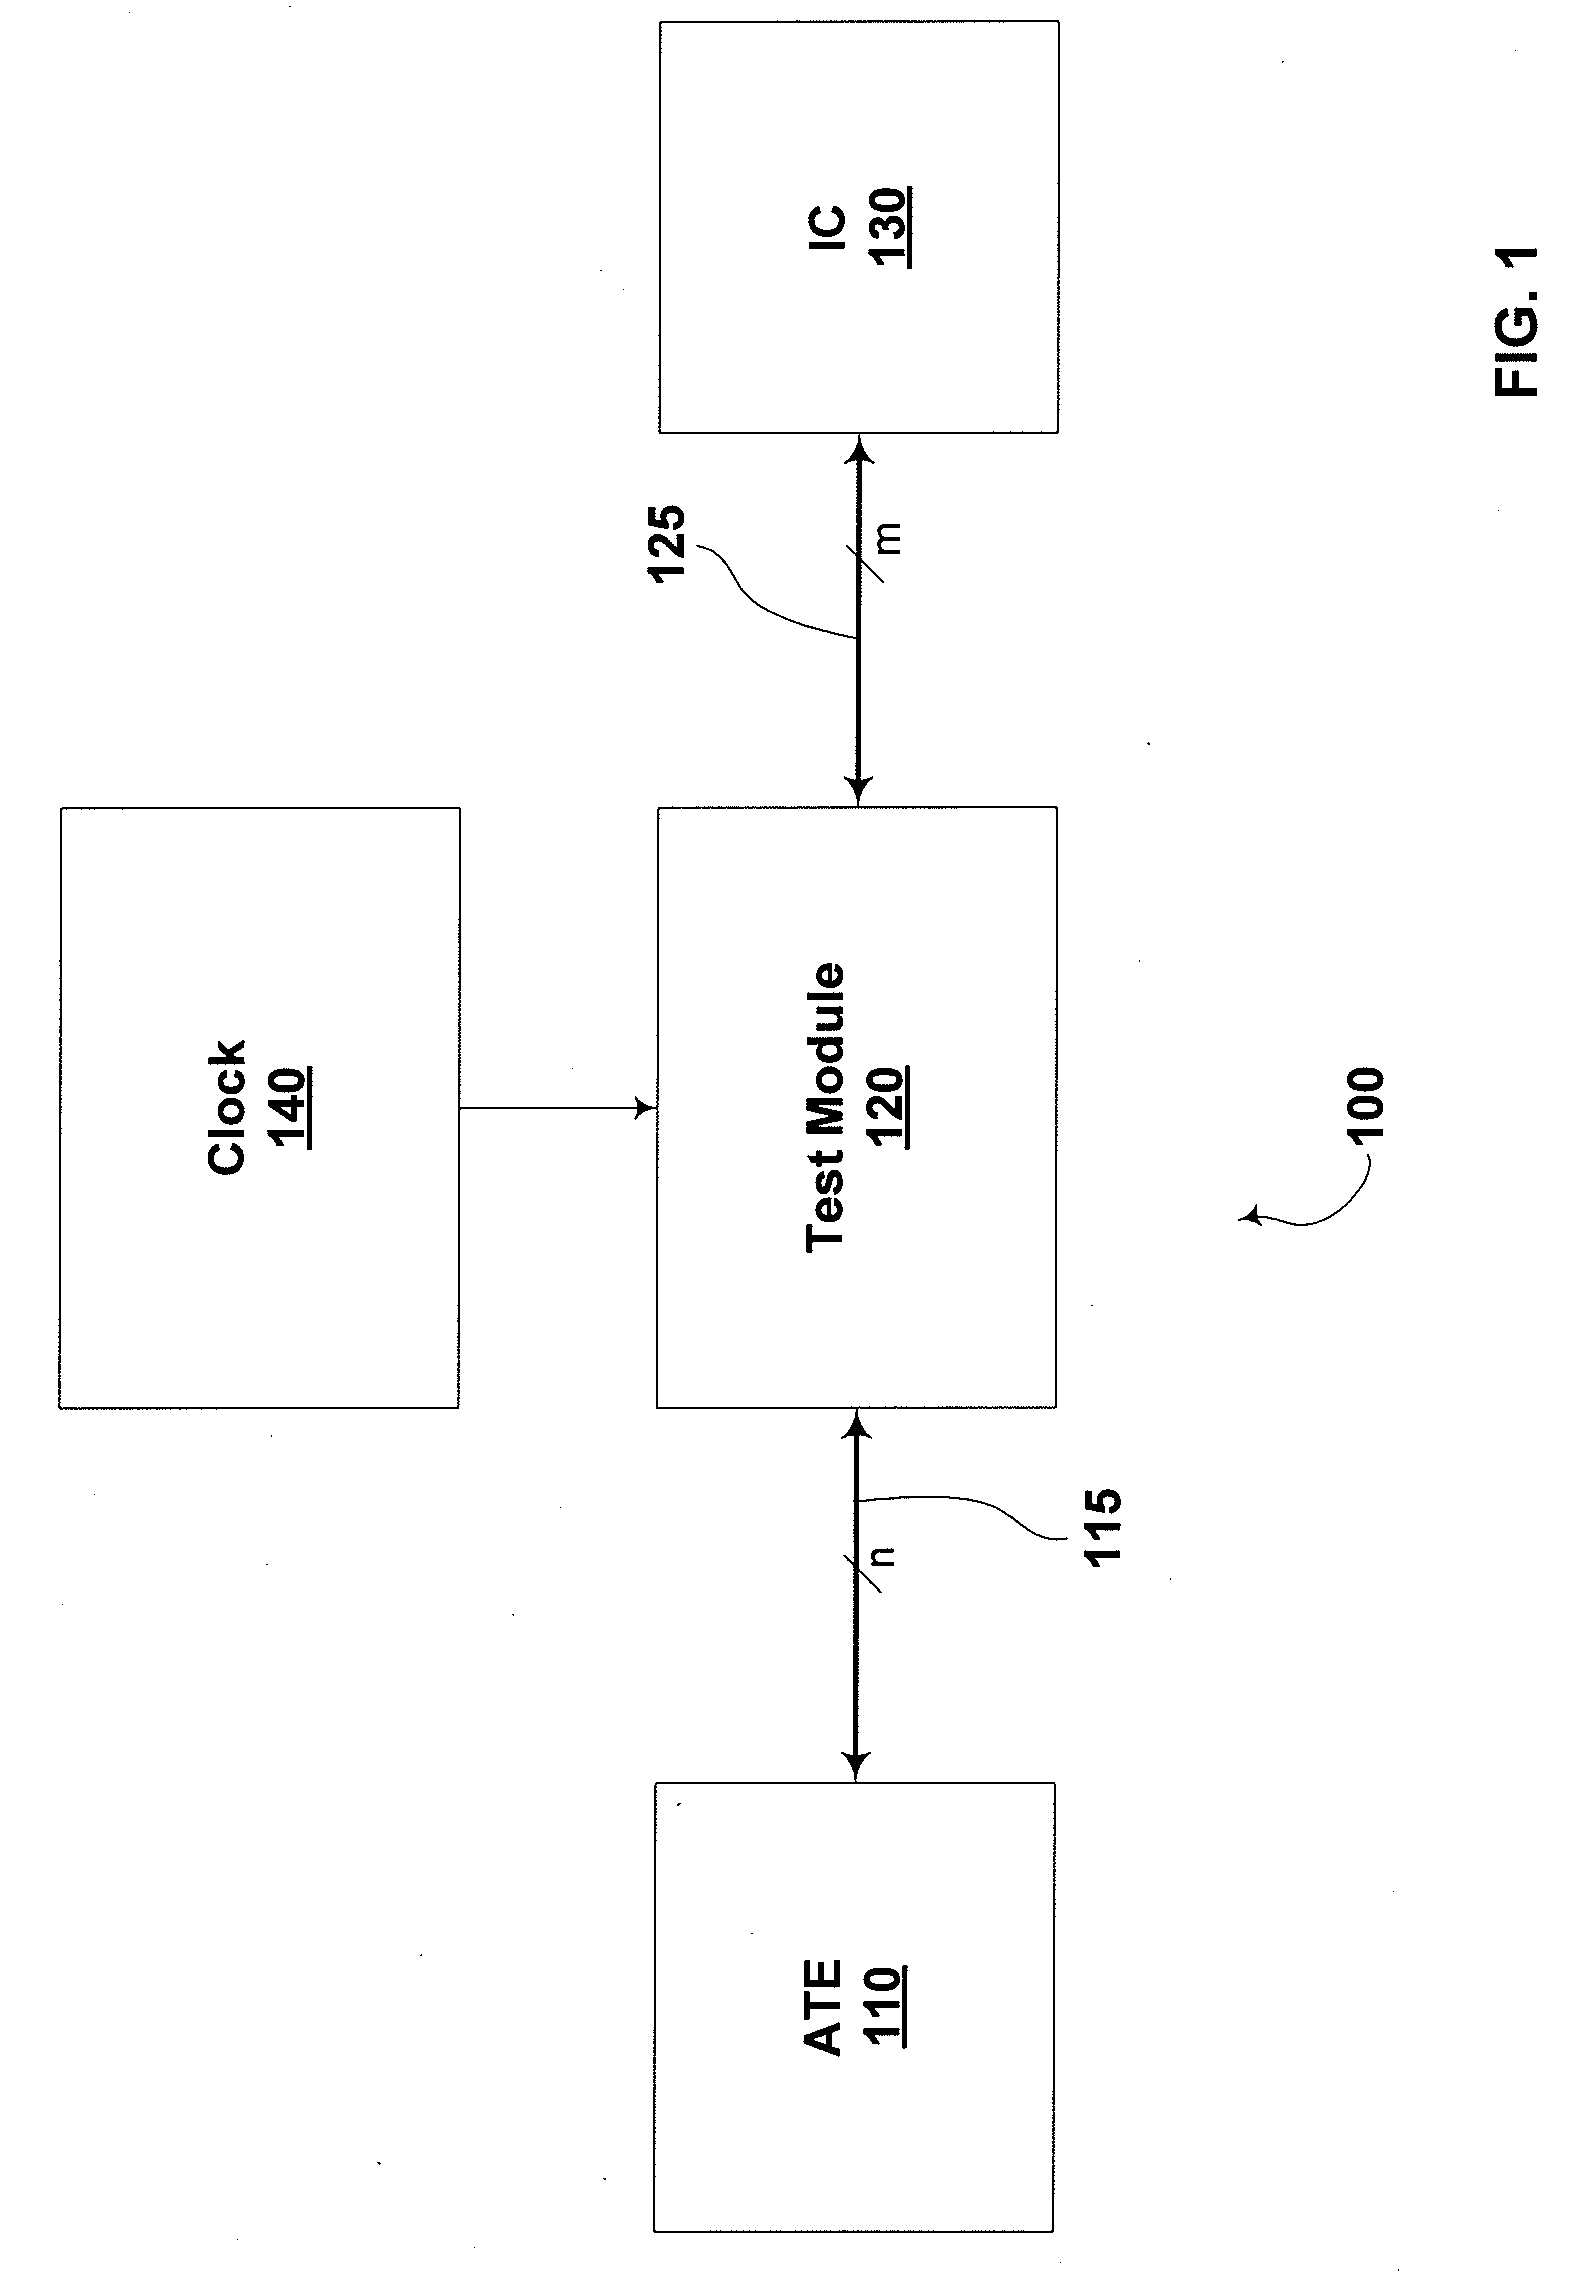 Integrated Circuit Testing Module Configured for Set-up and Hold Time Testing